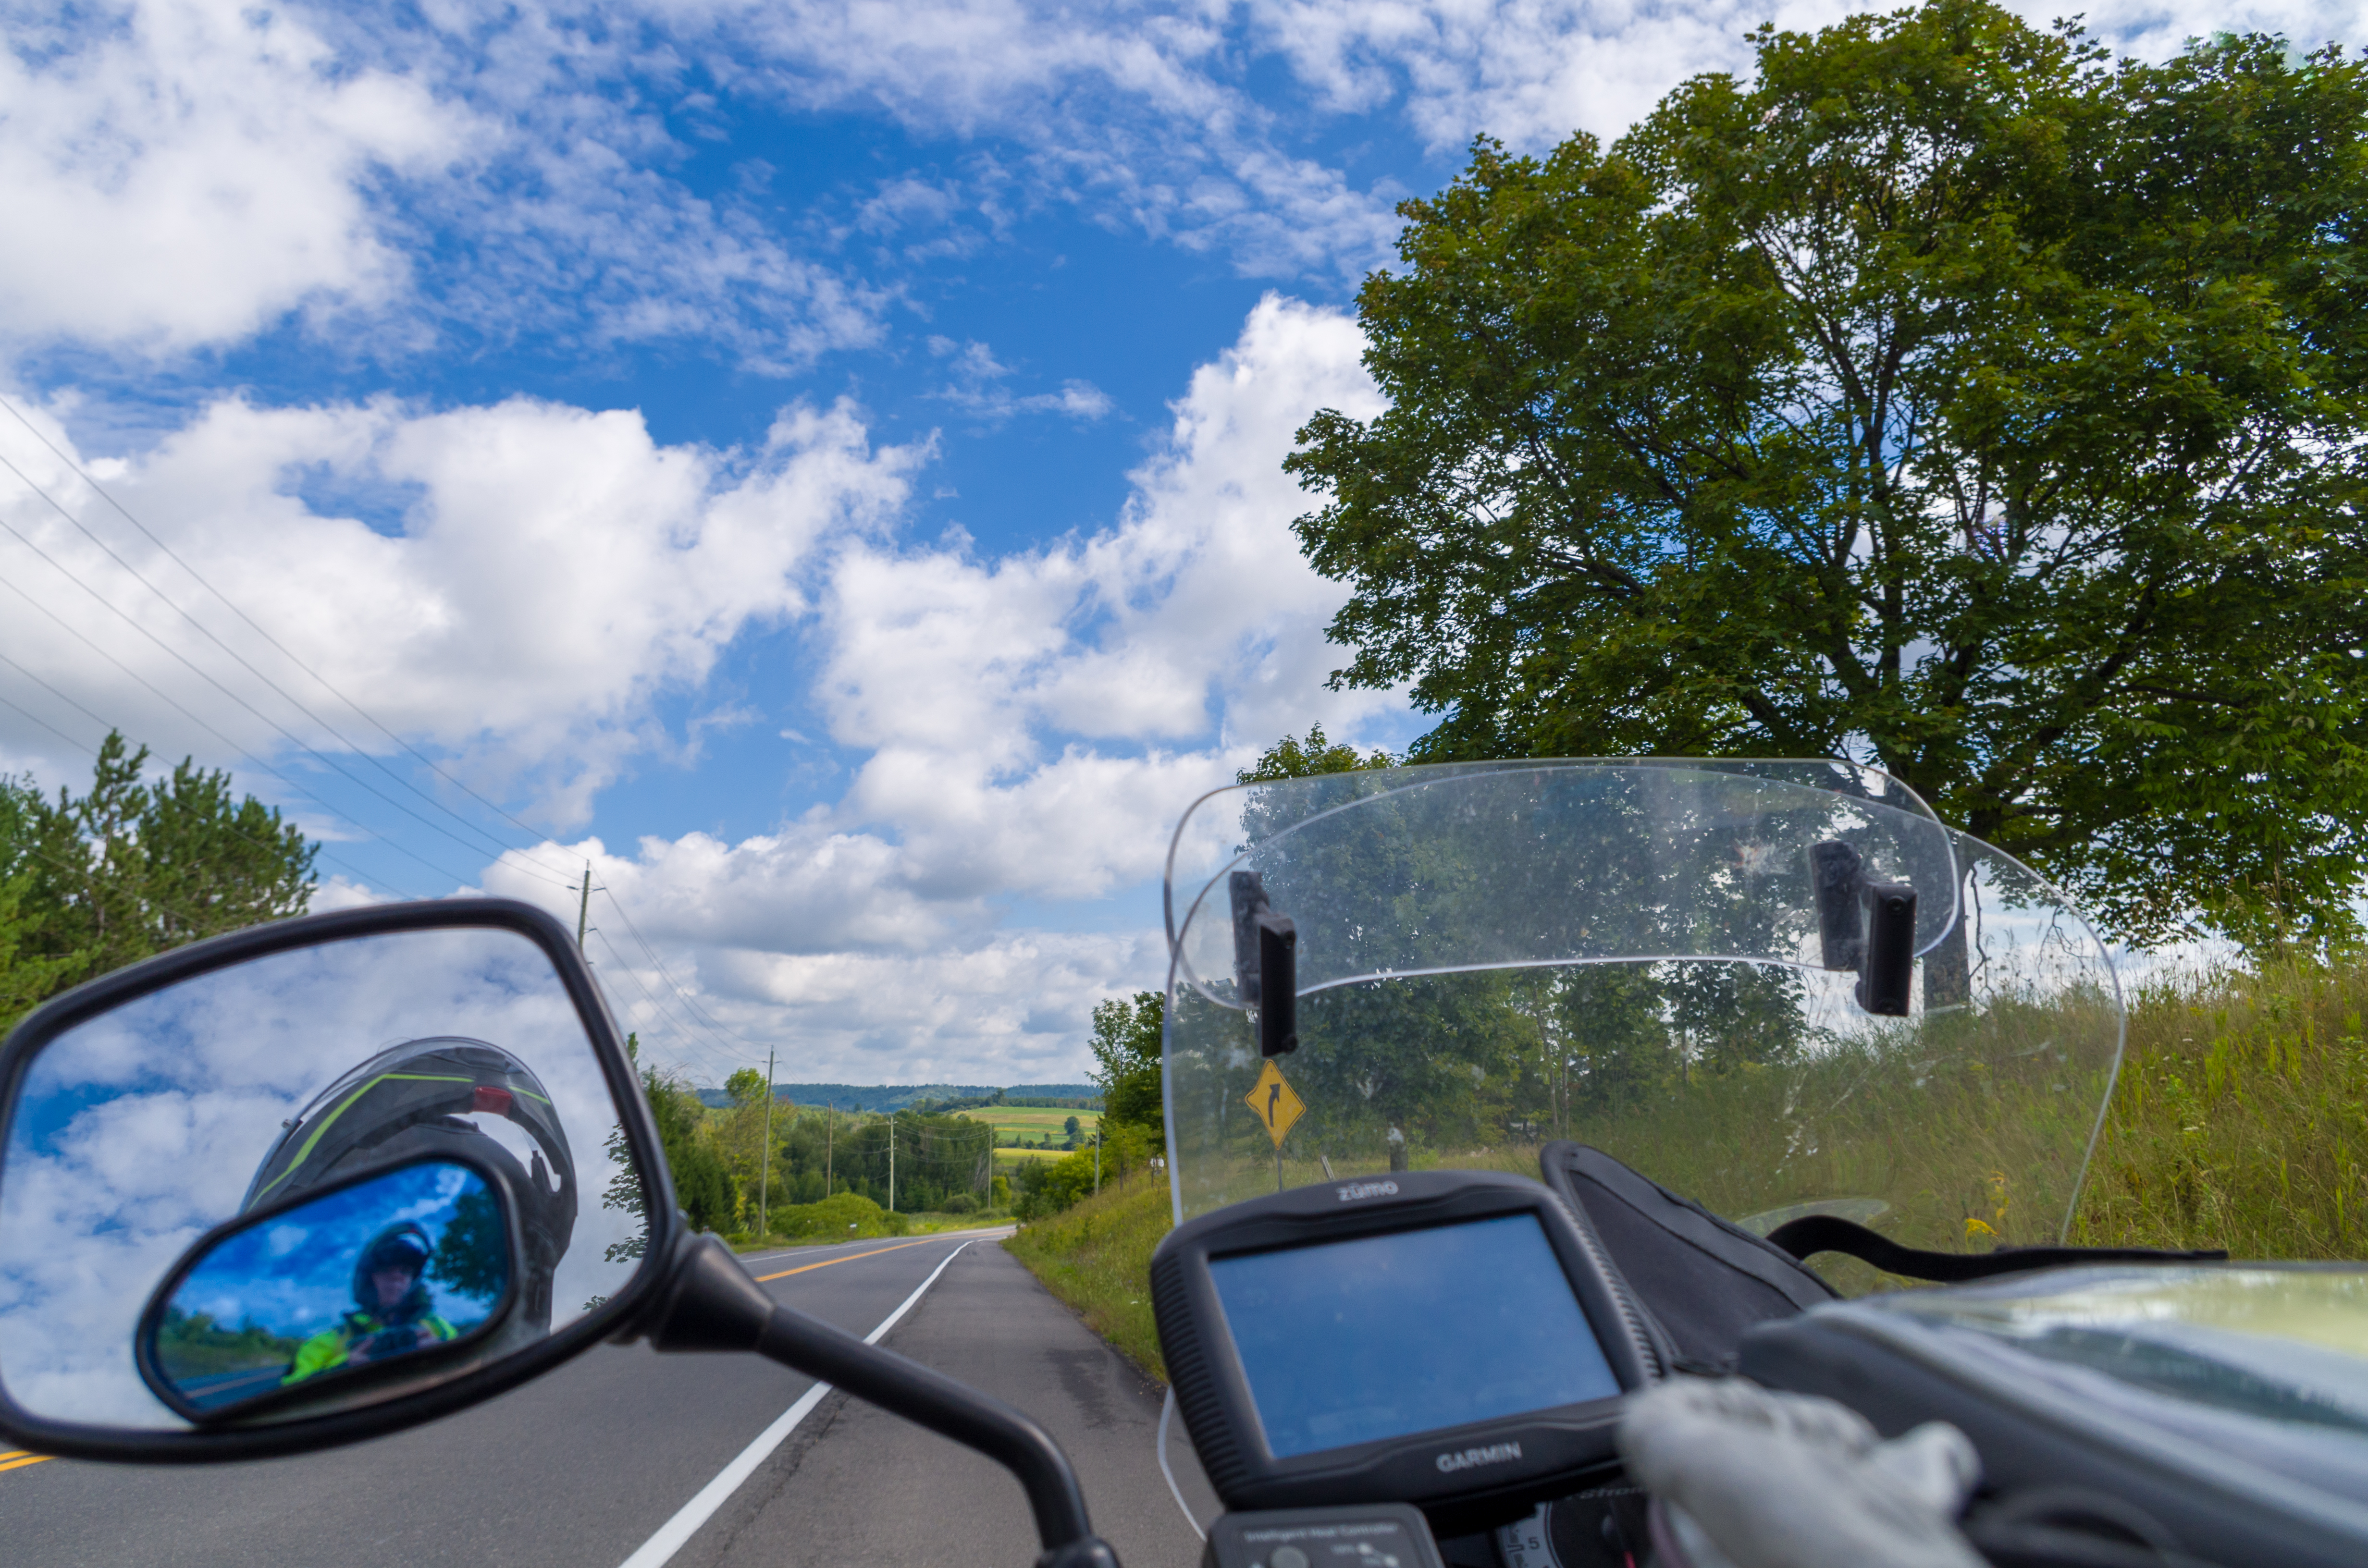 Blue sky, green trees and fields and an open road, seen over a motorcycle rearview mirror